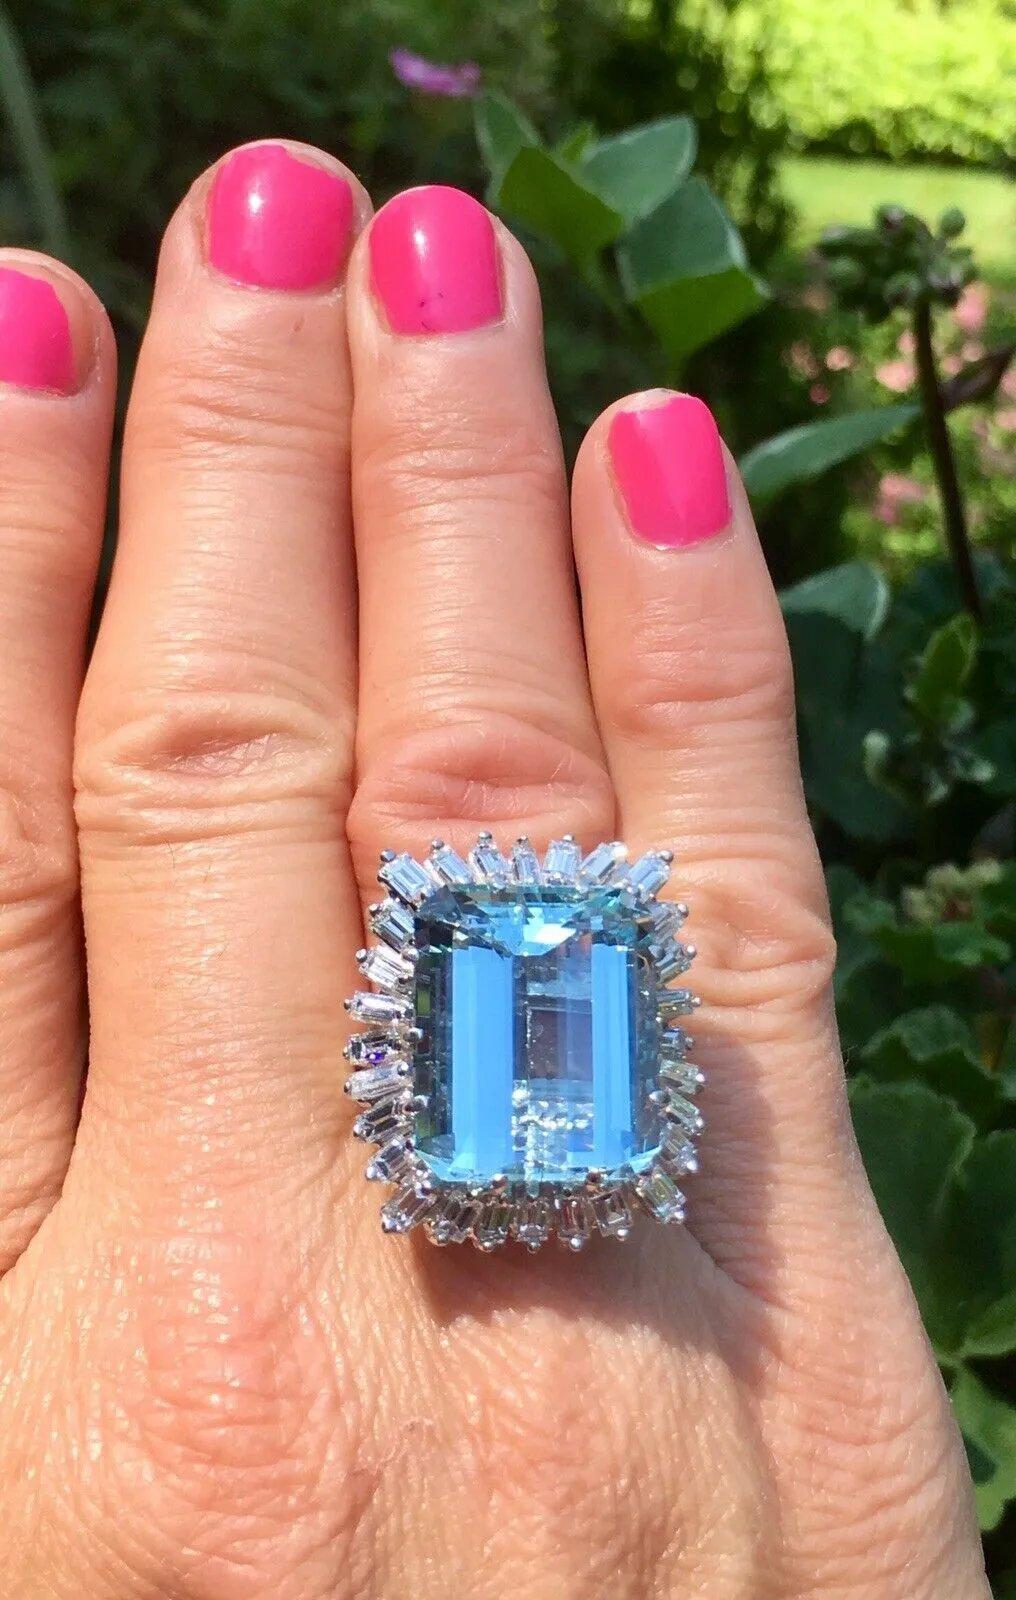 Midcentury 19 Carat VVS Aquamarine Diamond Baguette Ballerina Cocktail Ring In Excellent Condition For Sale In Shaker Heights, OH